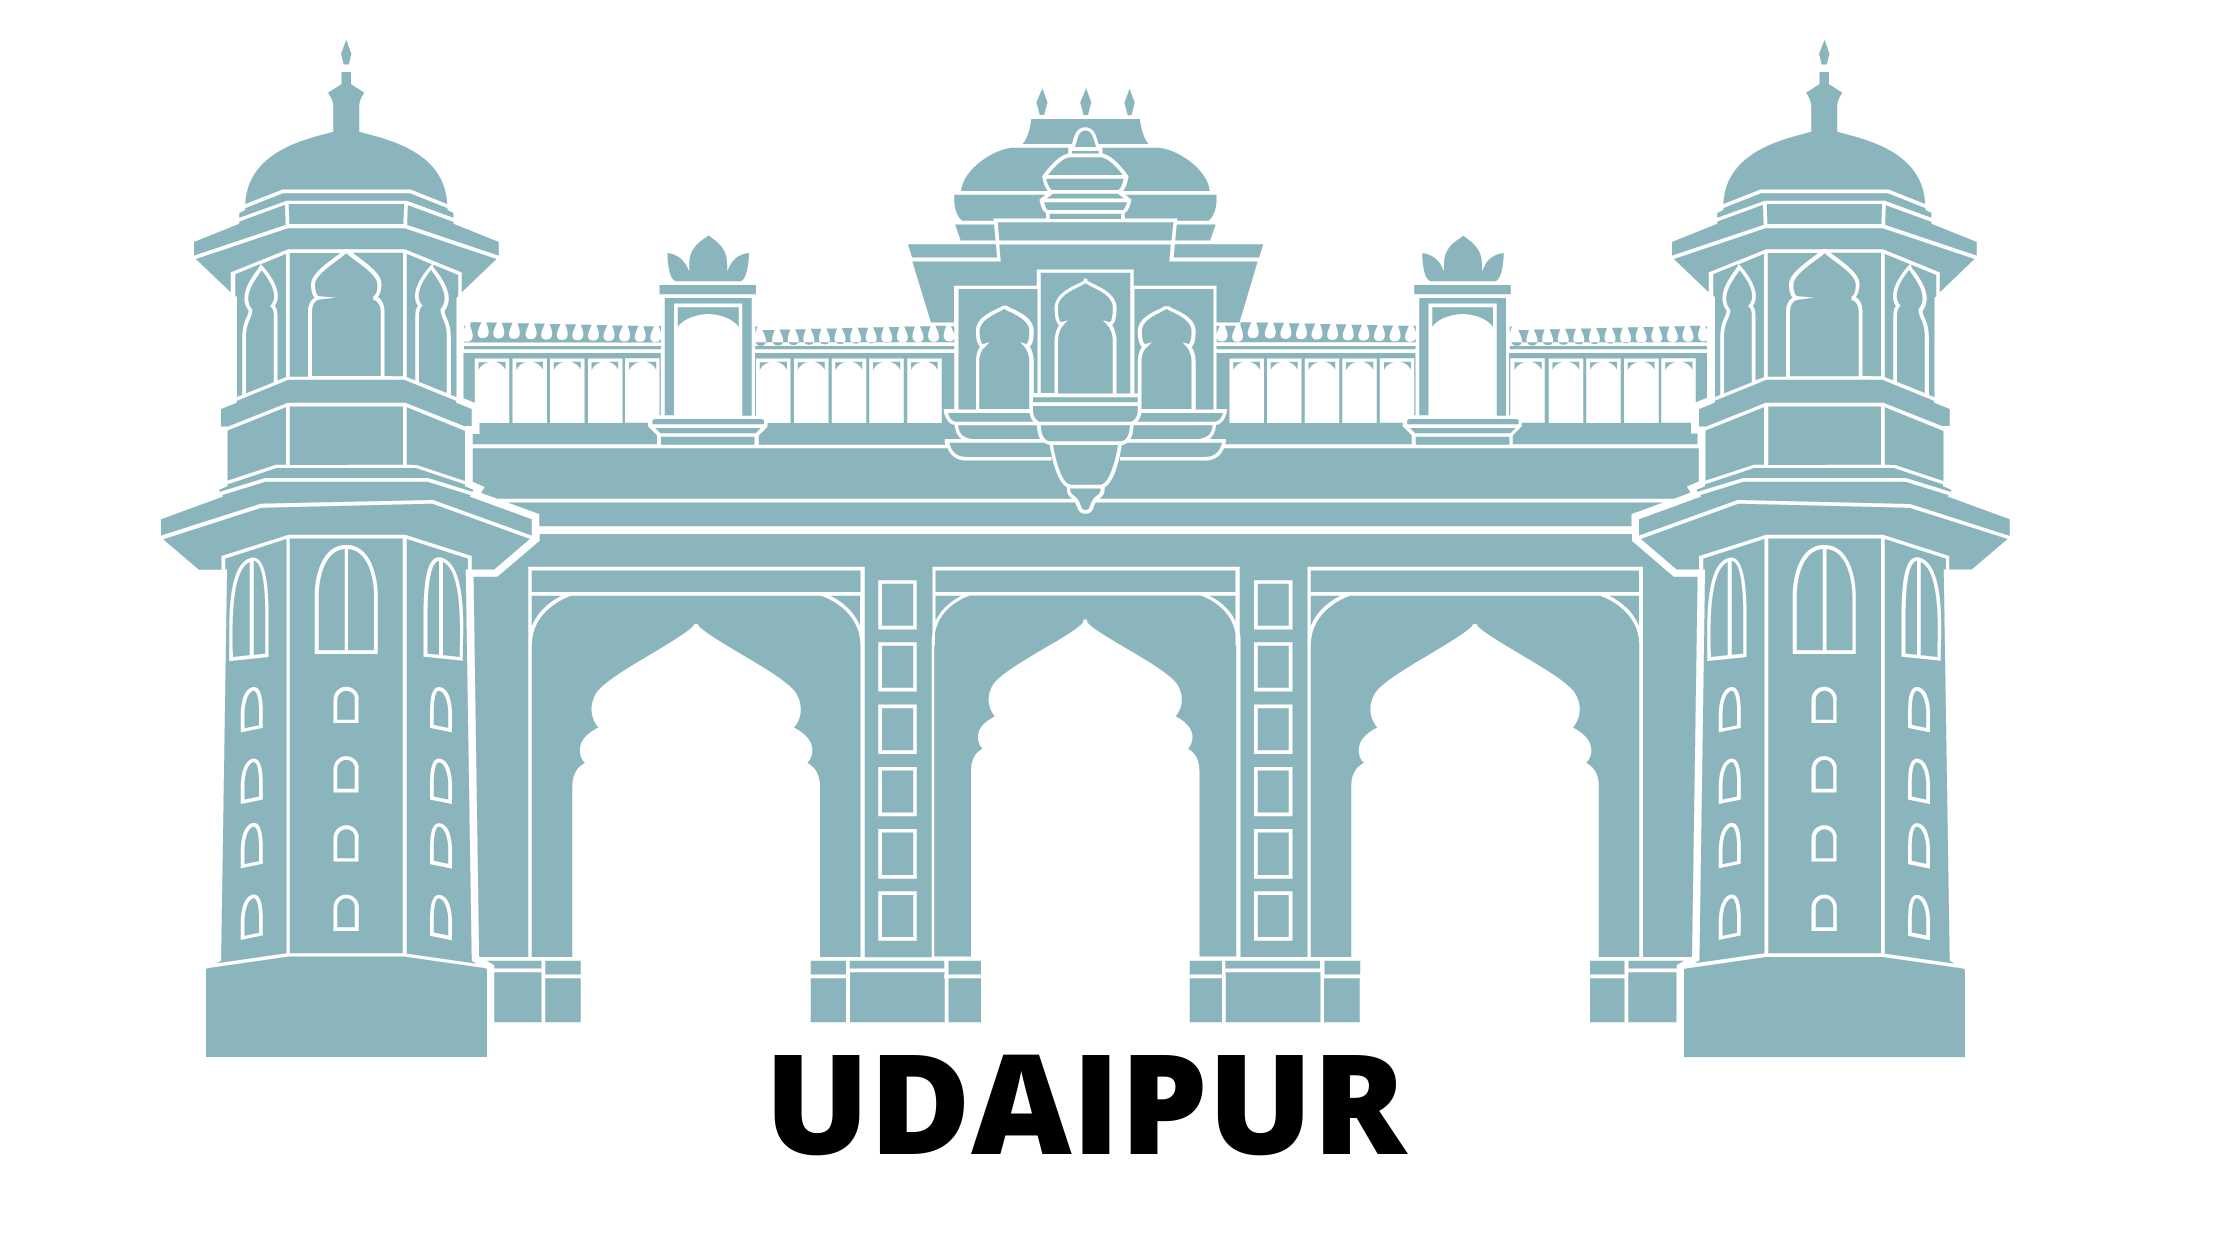 Plan your holiday to Udaipur: Check out some tips to get the best of hotels in Udaipur at effective prices